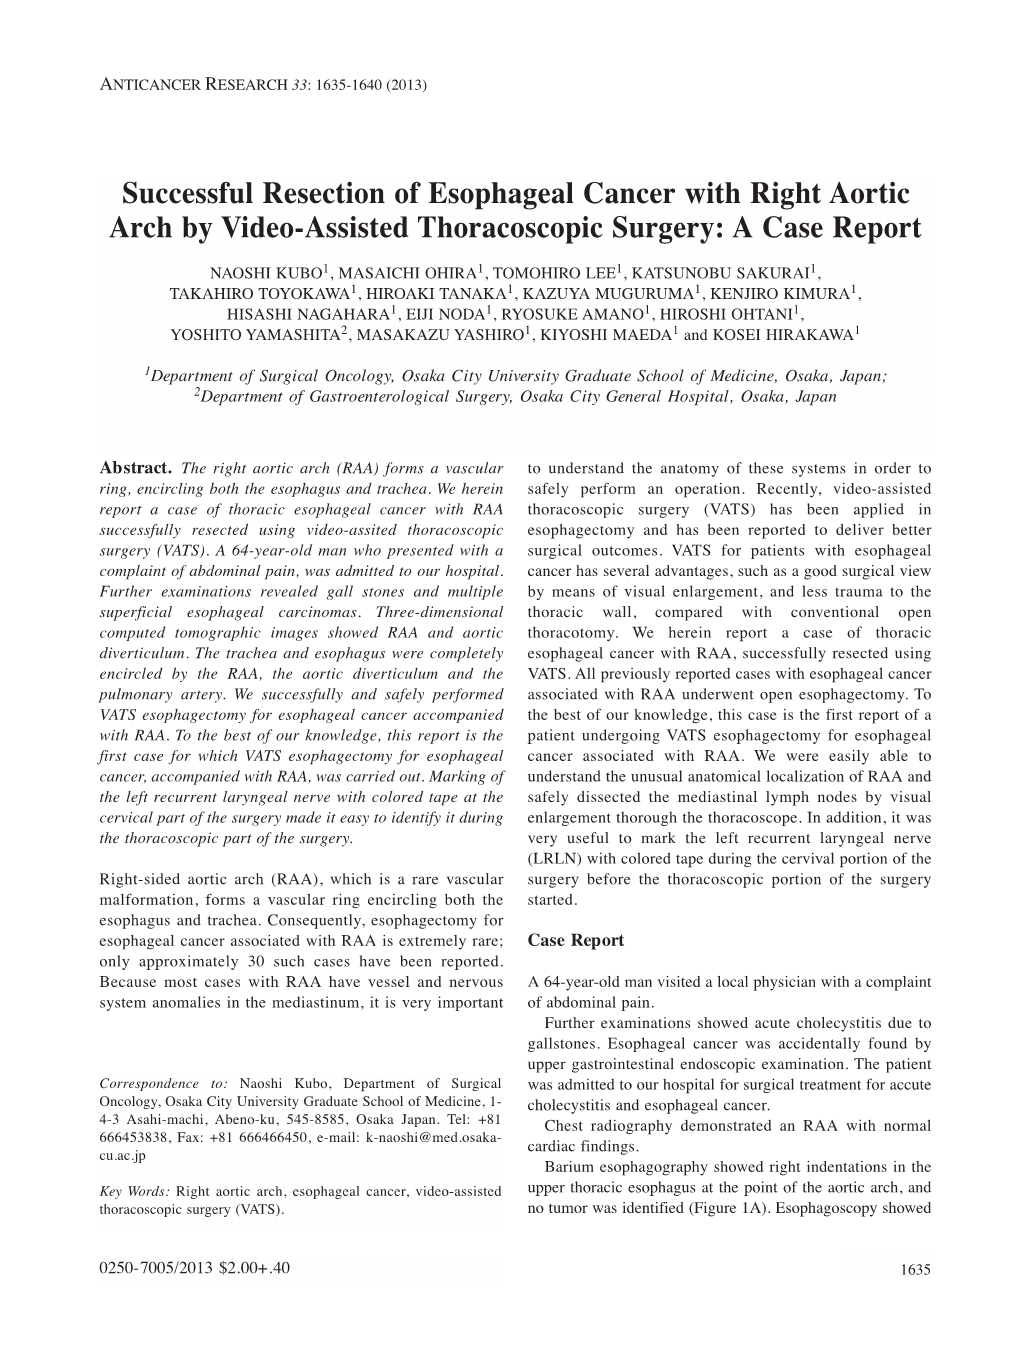 Successful Resection of Esophageal Cancer with Right Aortic Arch by Video-Assisted Thoracoscopic Surgery: a Case Report